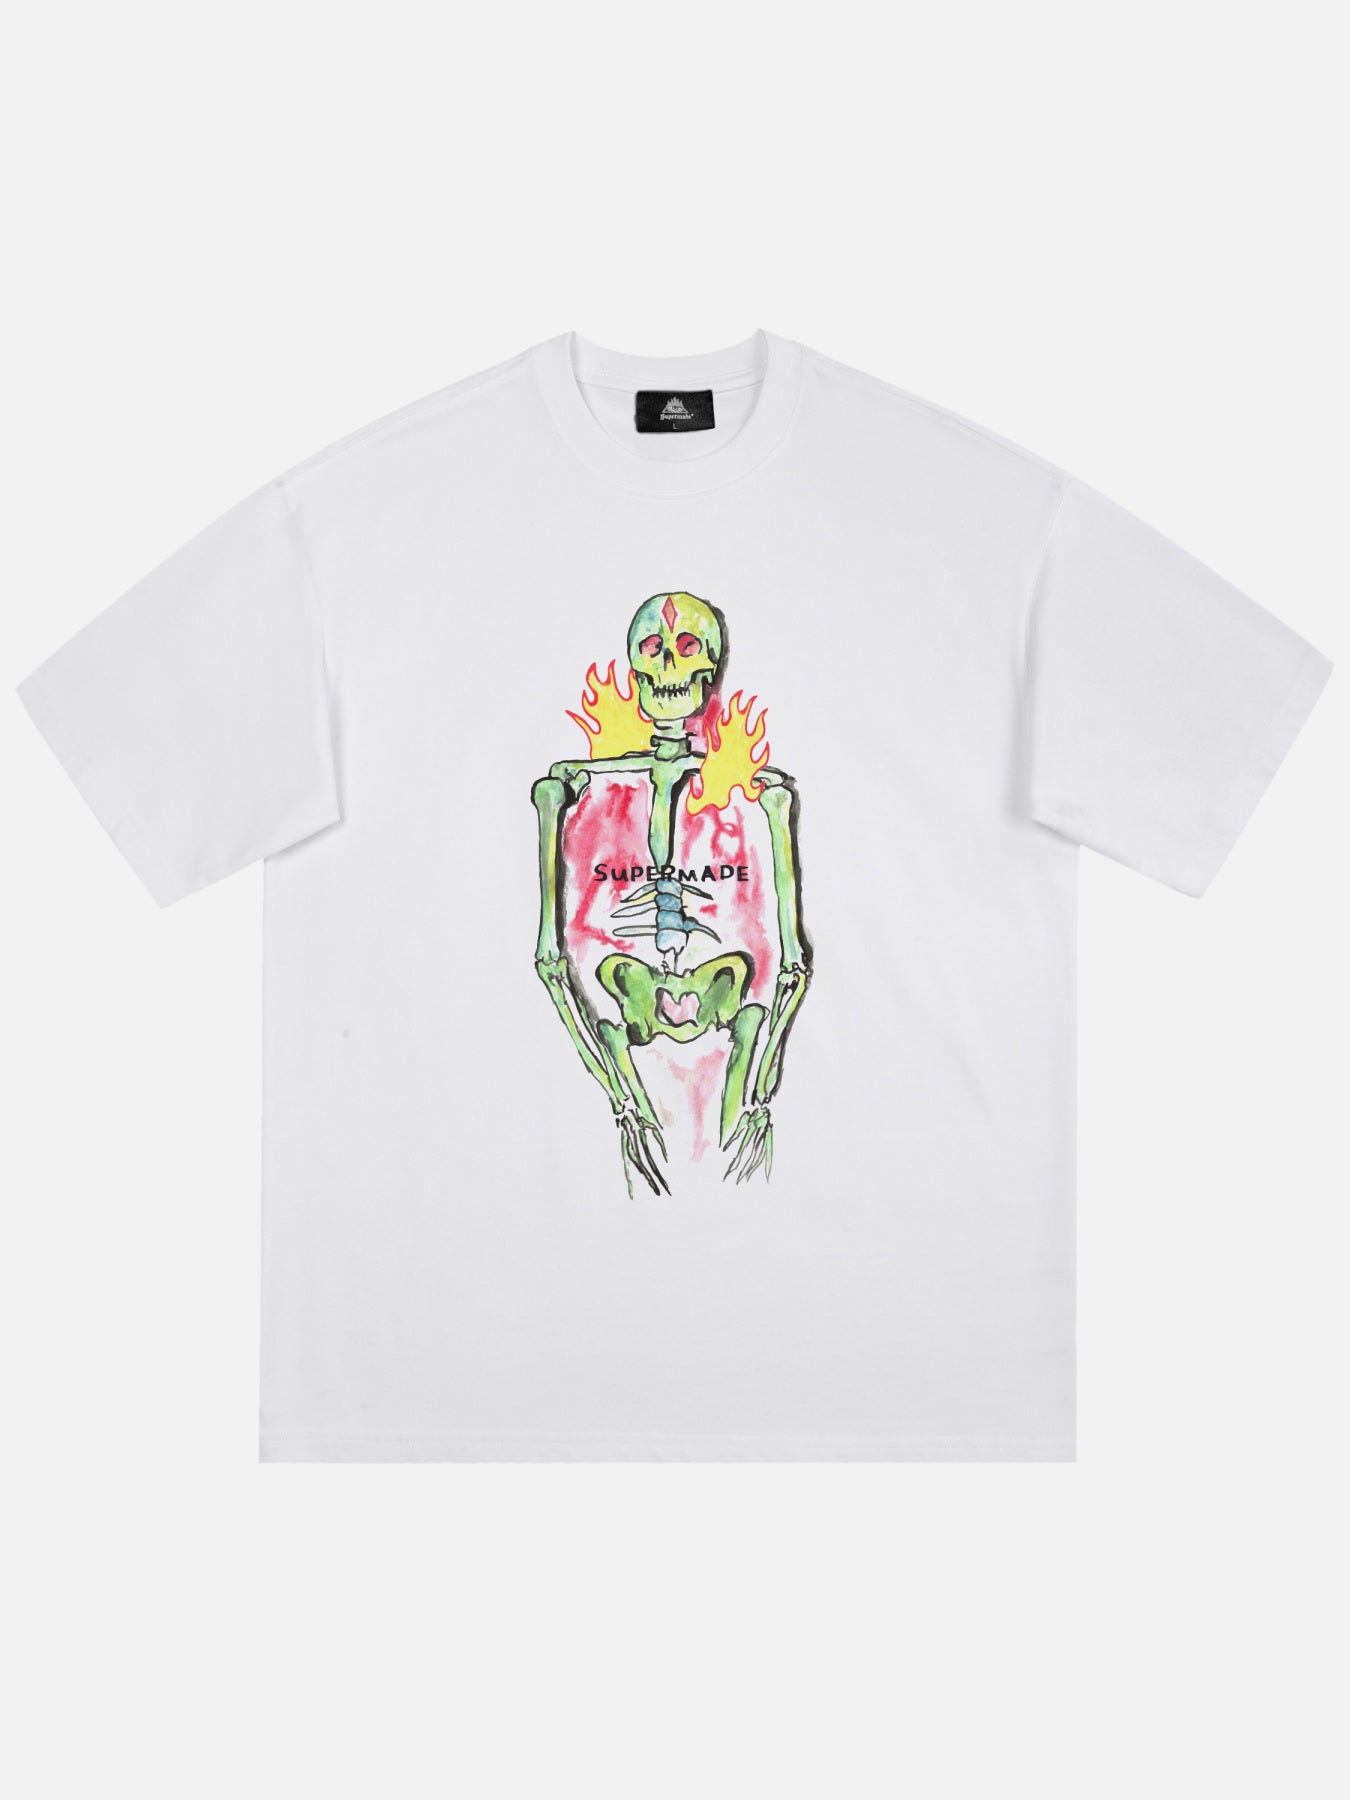 The Supermade Hand-painted Skull Print T-shirt